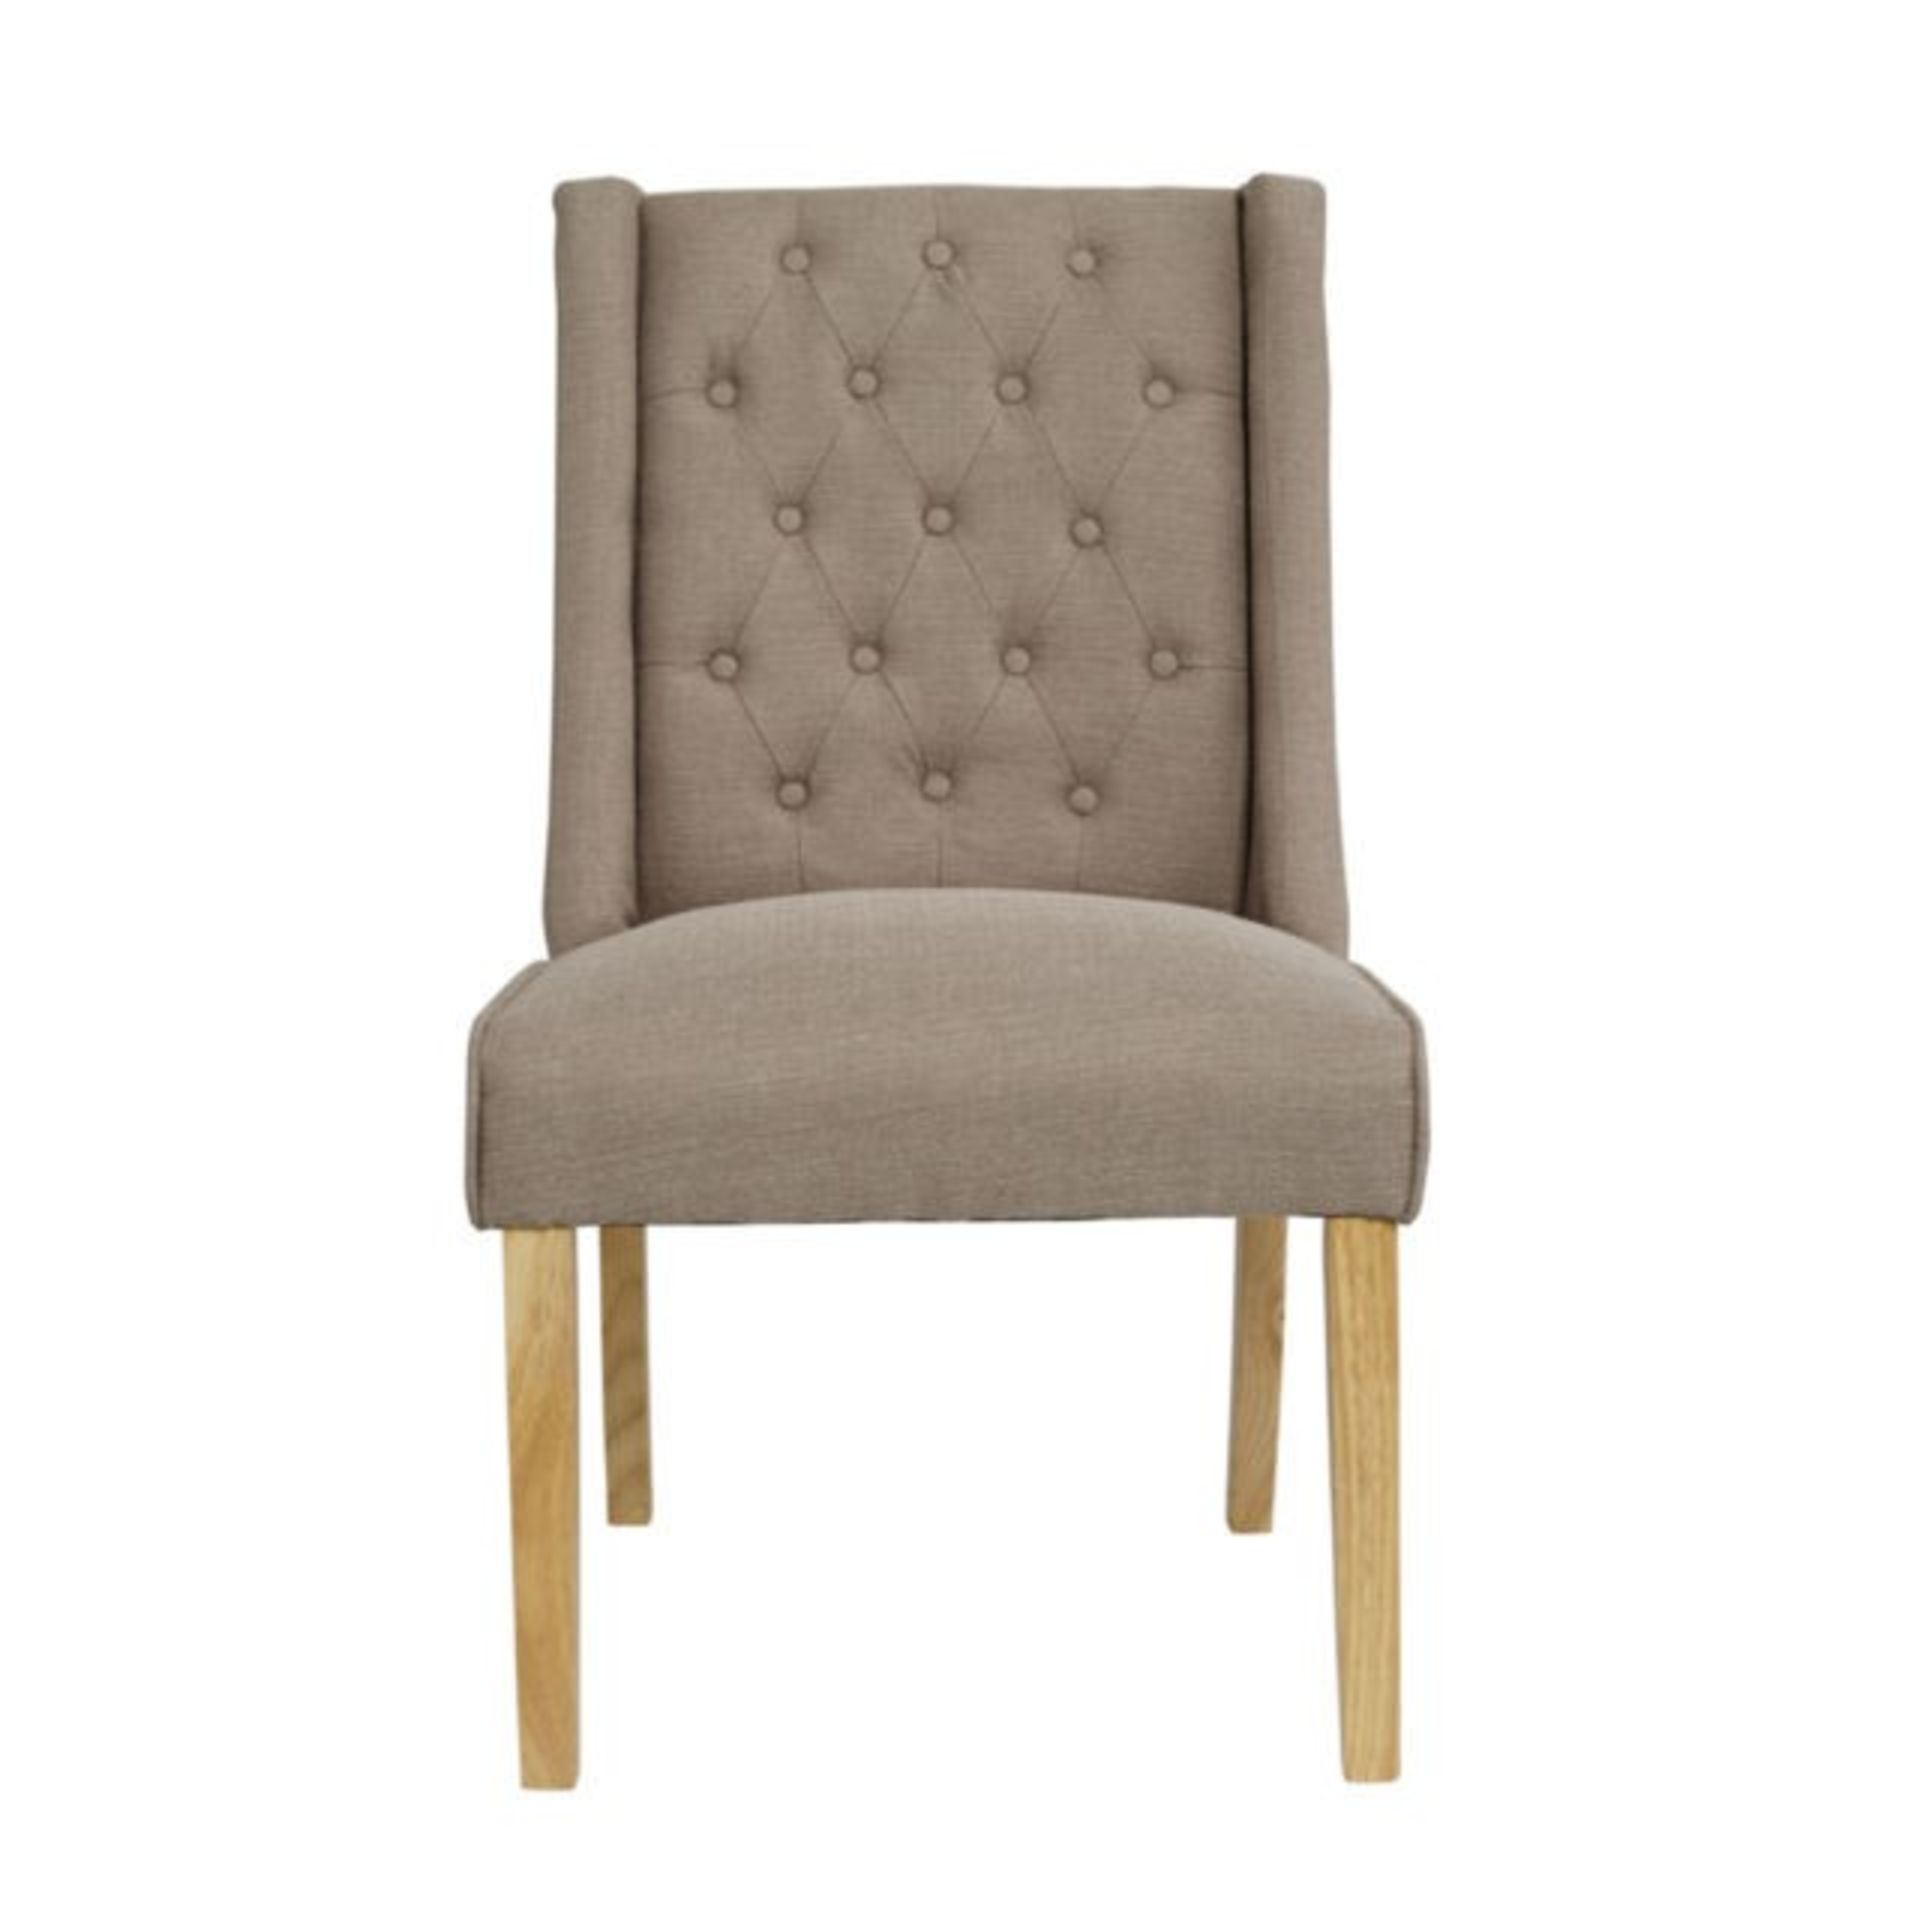 1 GRADE A BOXED PAIR OF VERONA DINING CHAIRS IN BEIGE / RRP £188.95 (VIEWING HIGHLY RECOMMENDED)